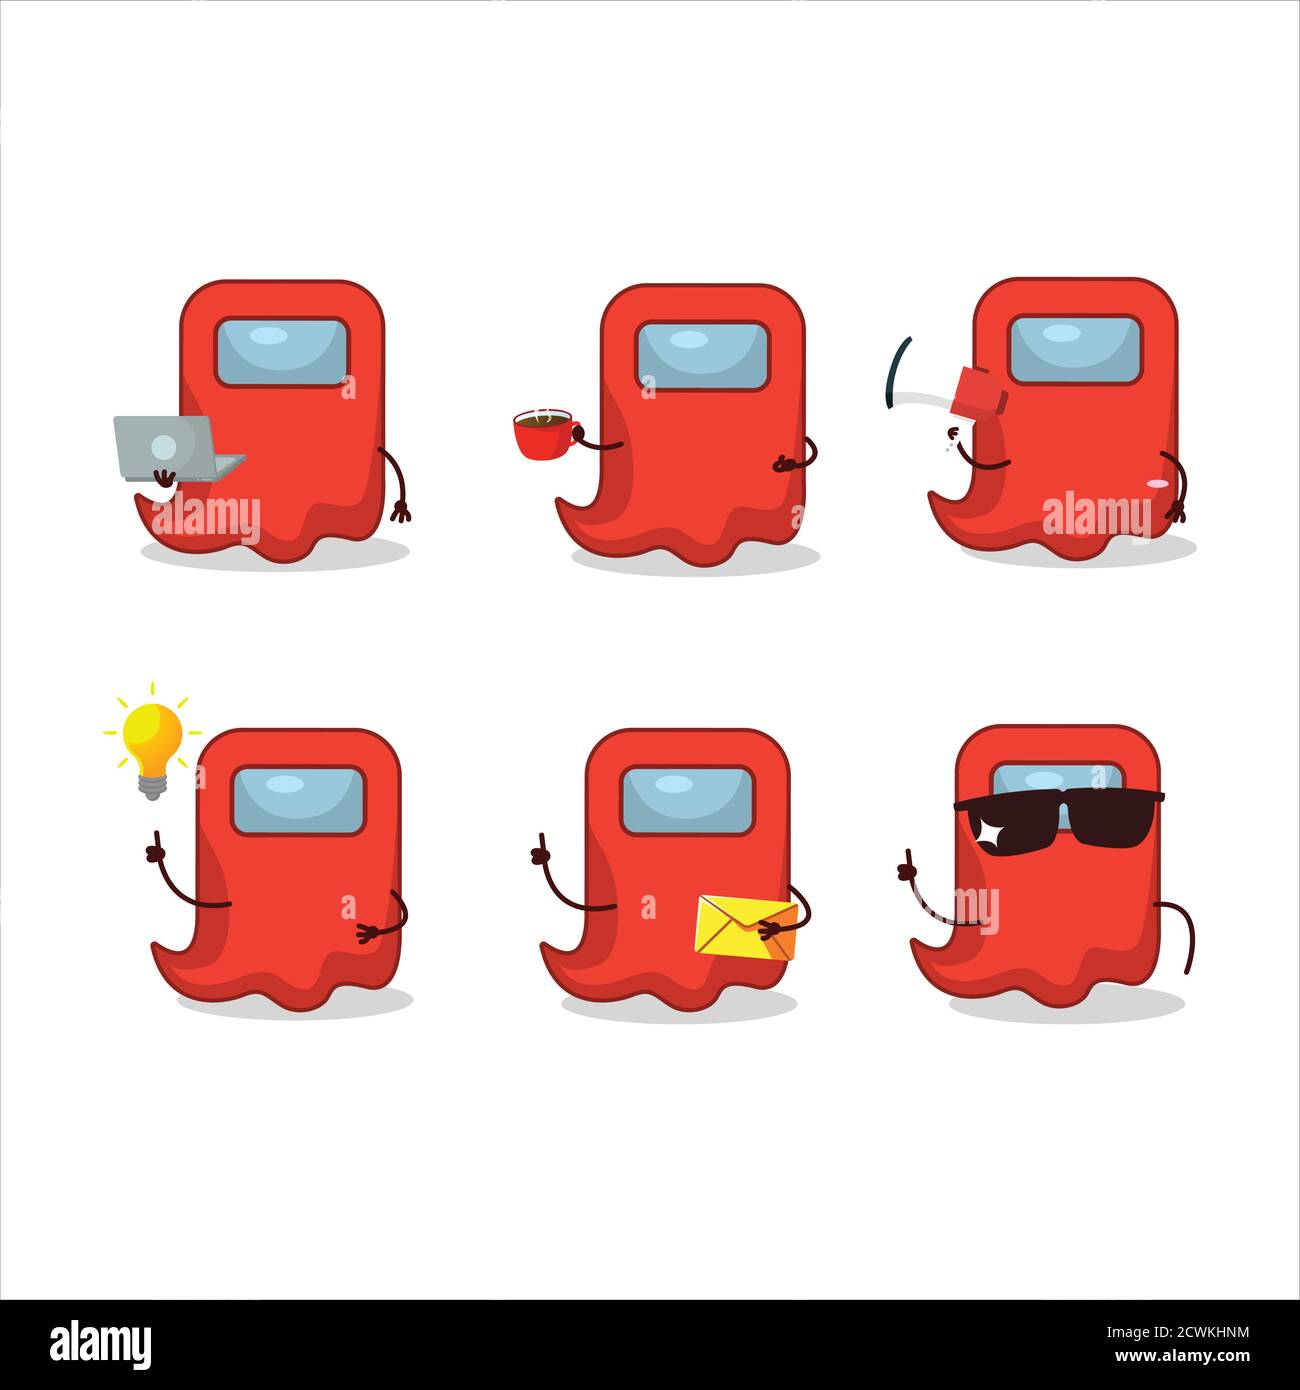 Ghost among us redcartoon character with various types of business emoticons Stock Vector